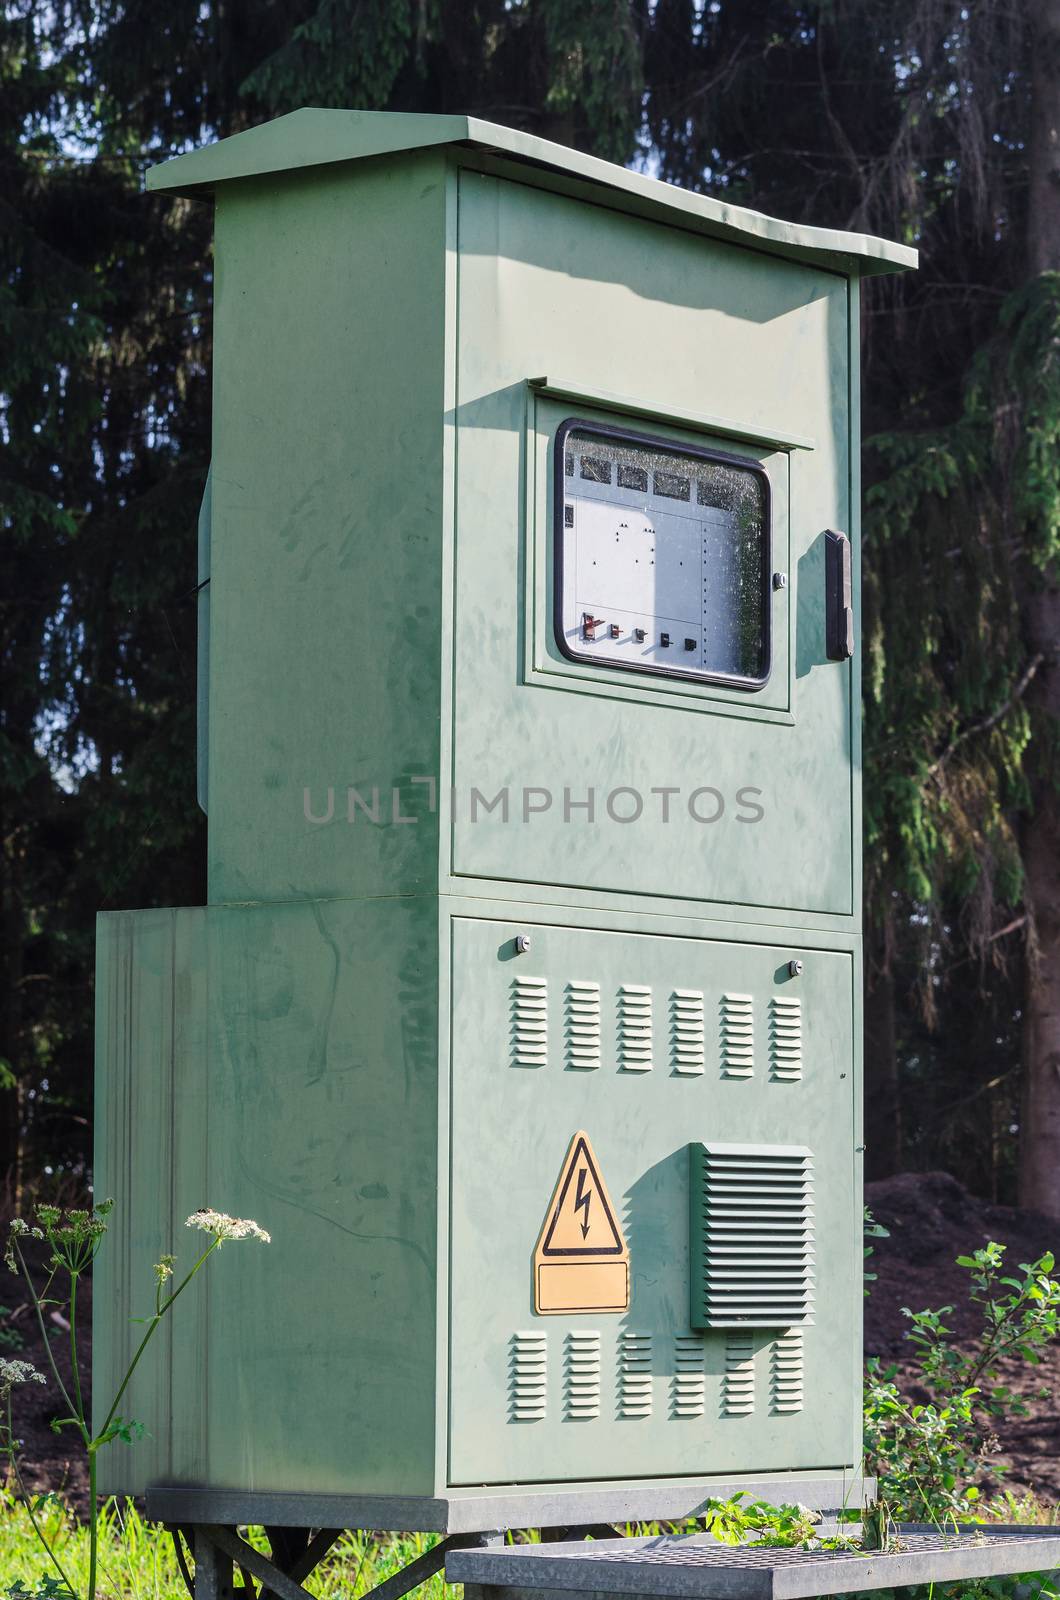 Electrical control box for outdoor installations.           by JFsPic